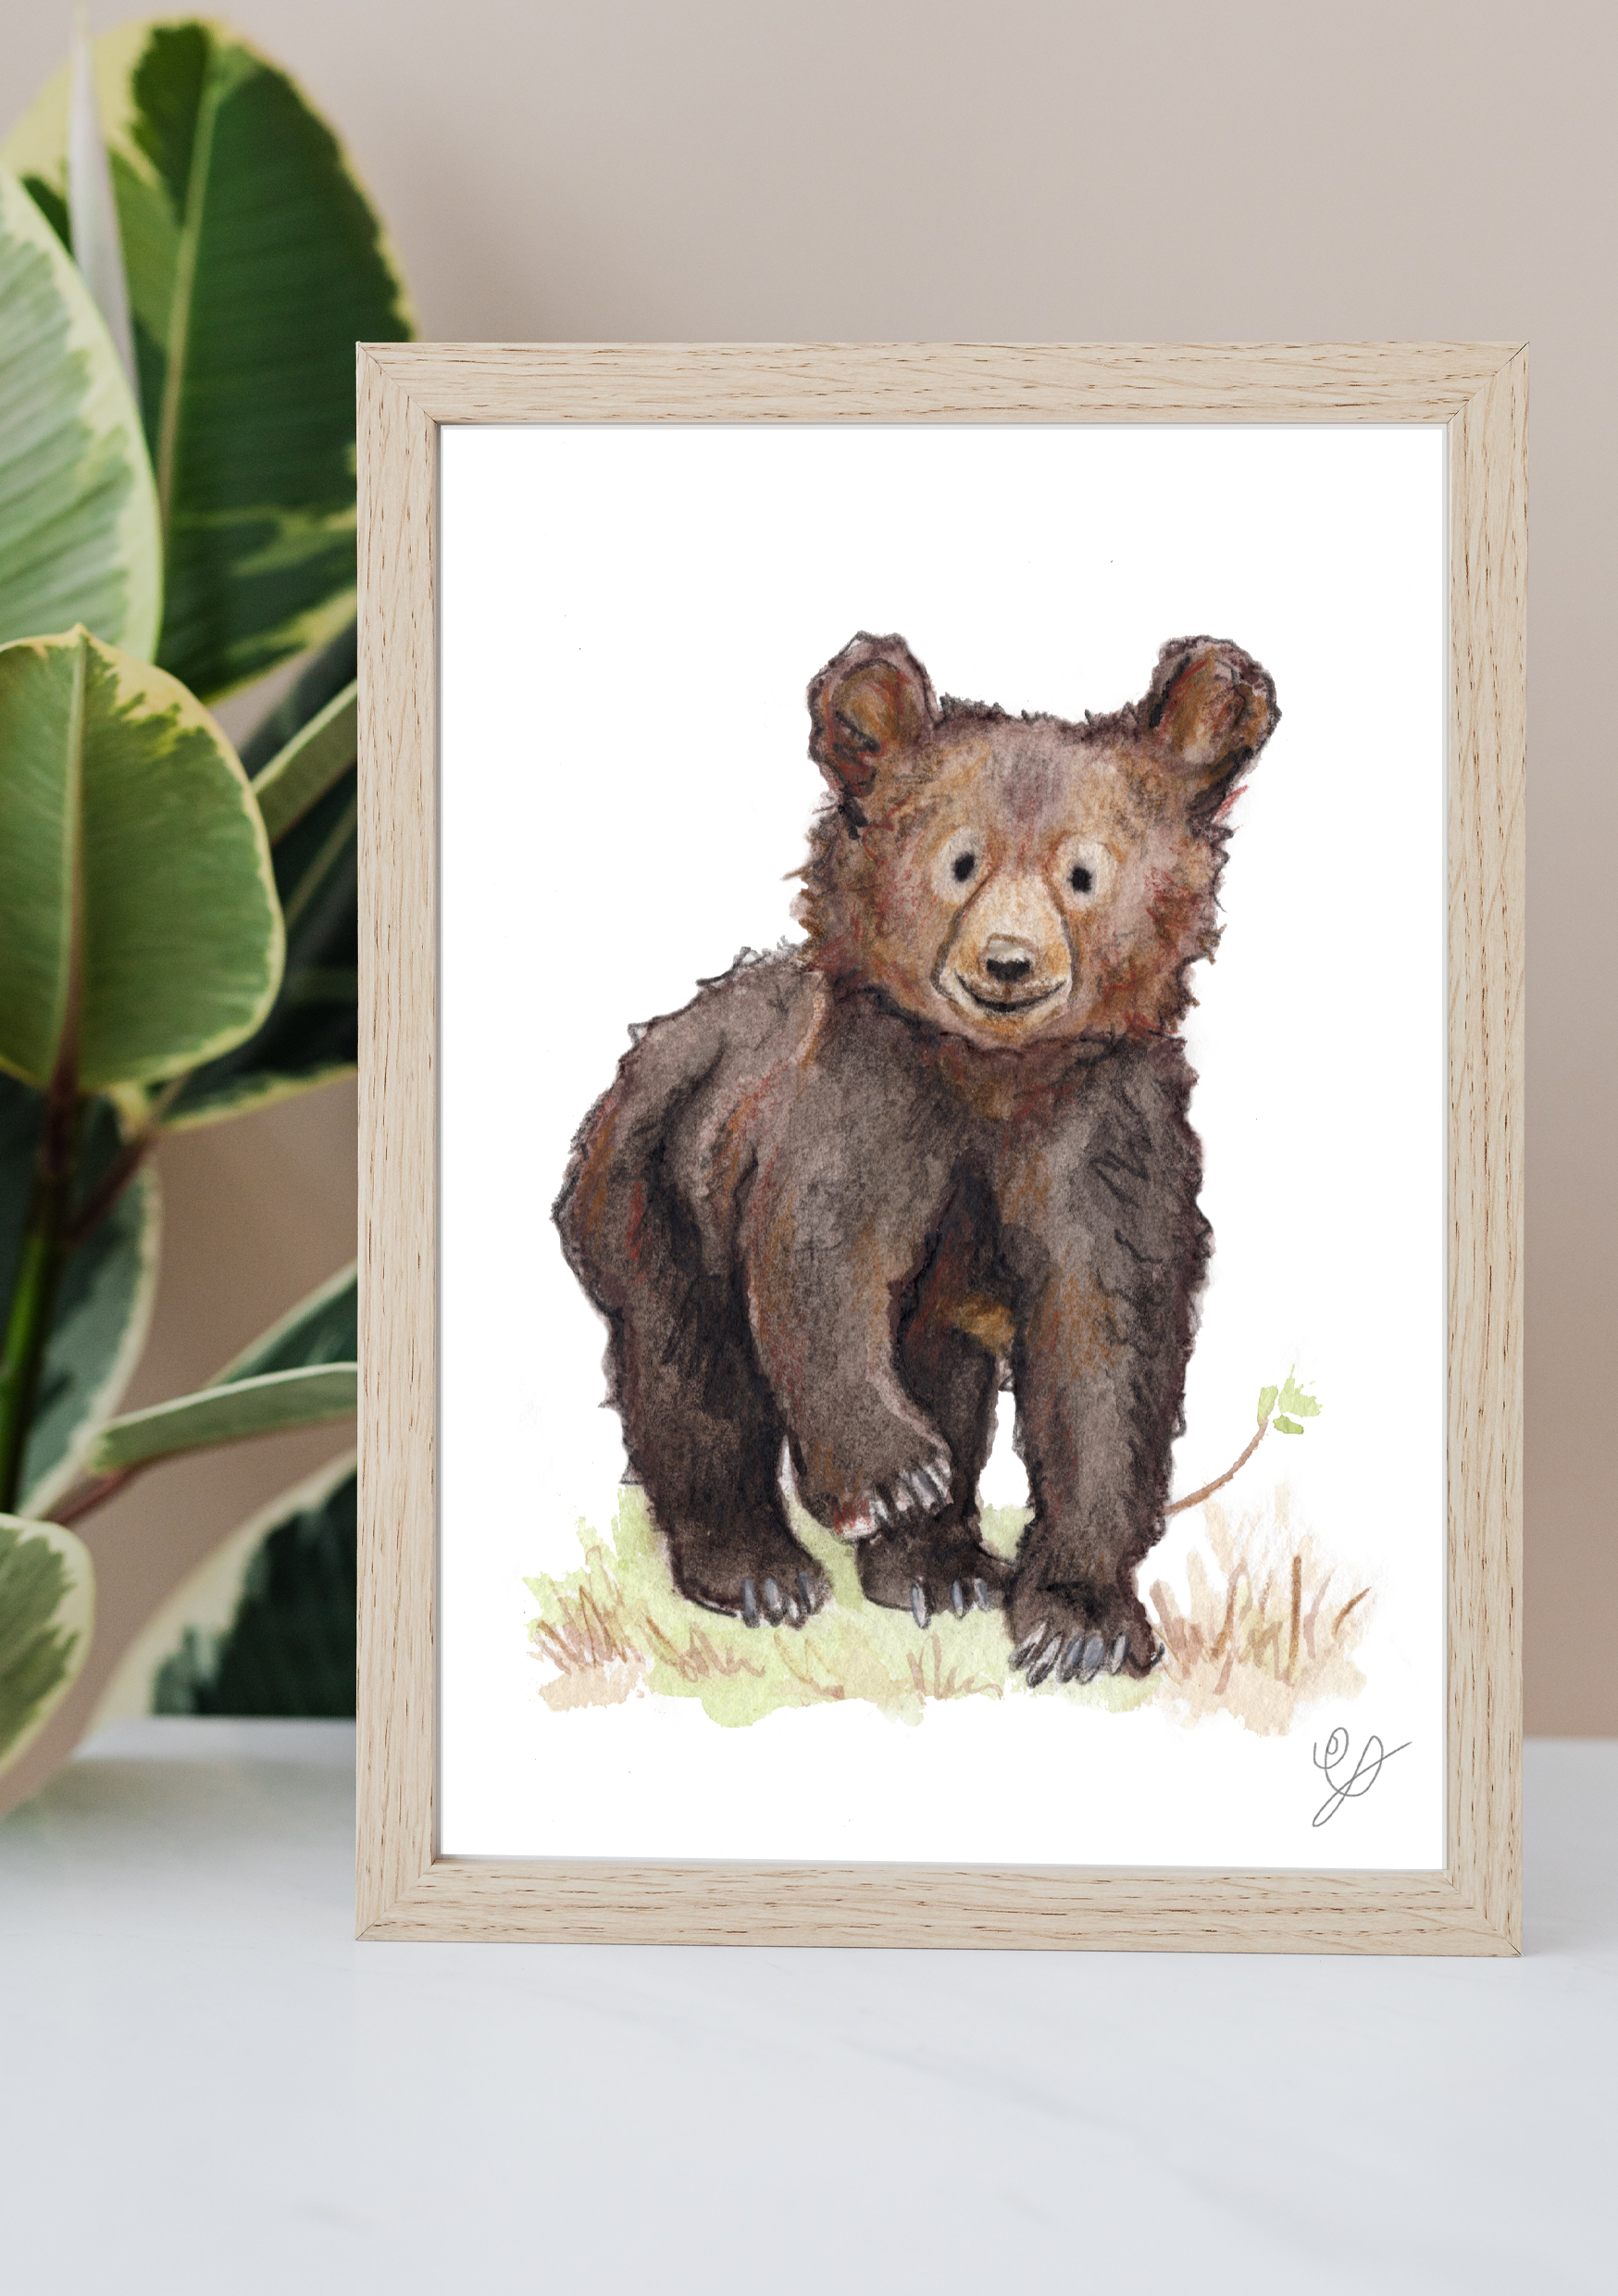 A framed watercolour painting of a bear cub